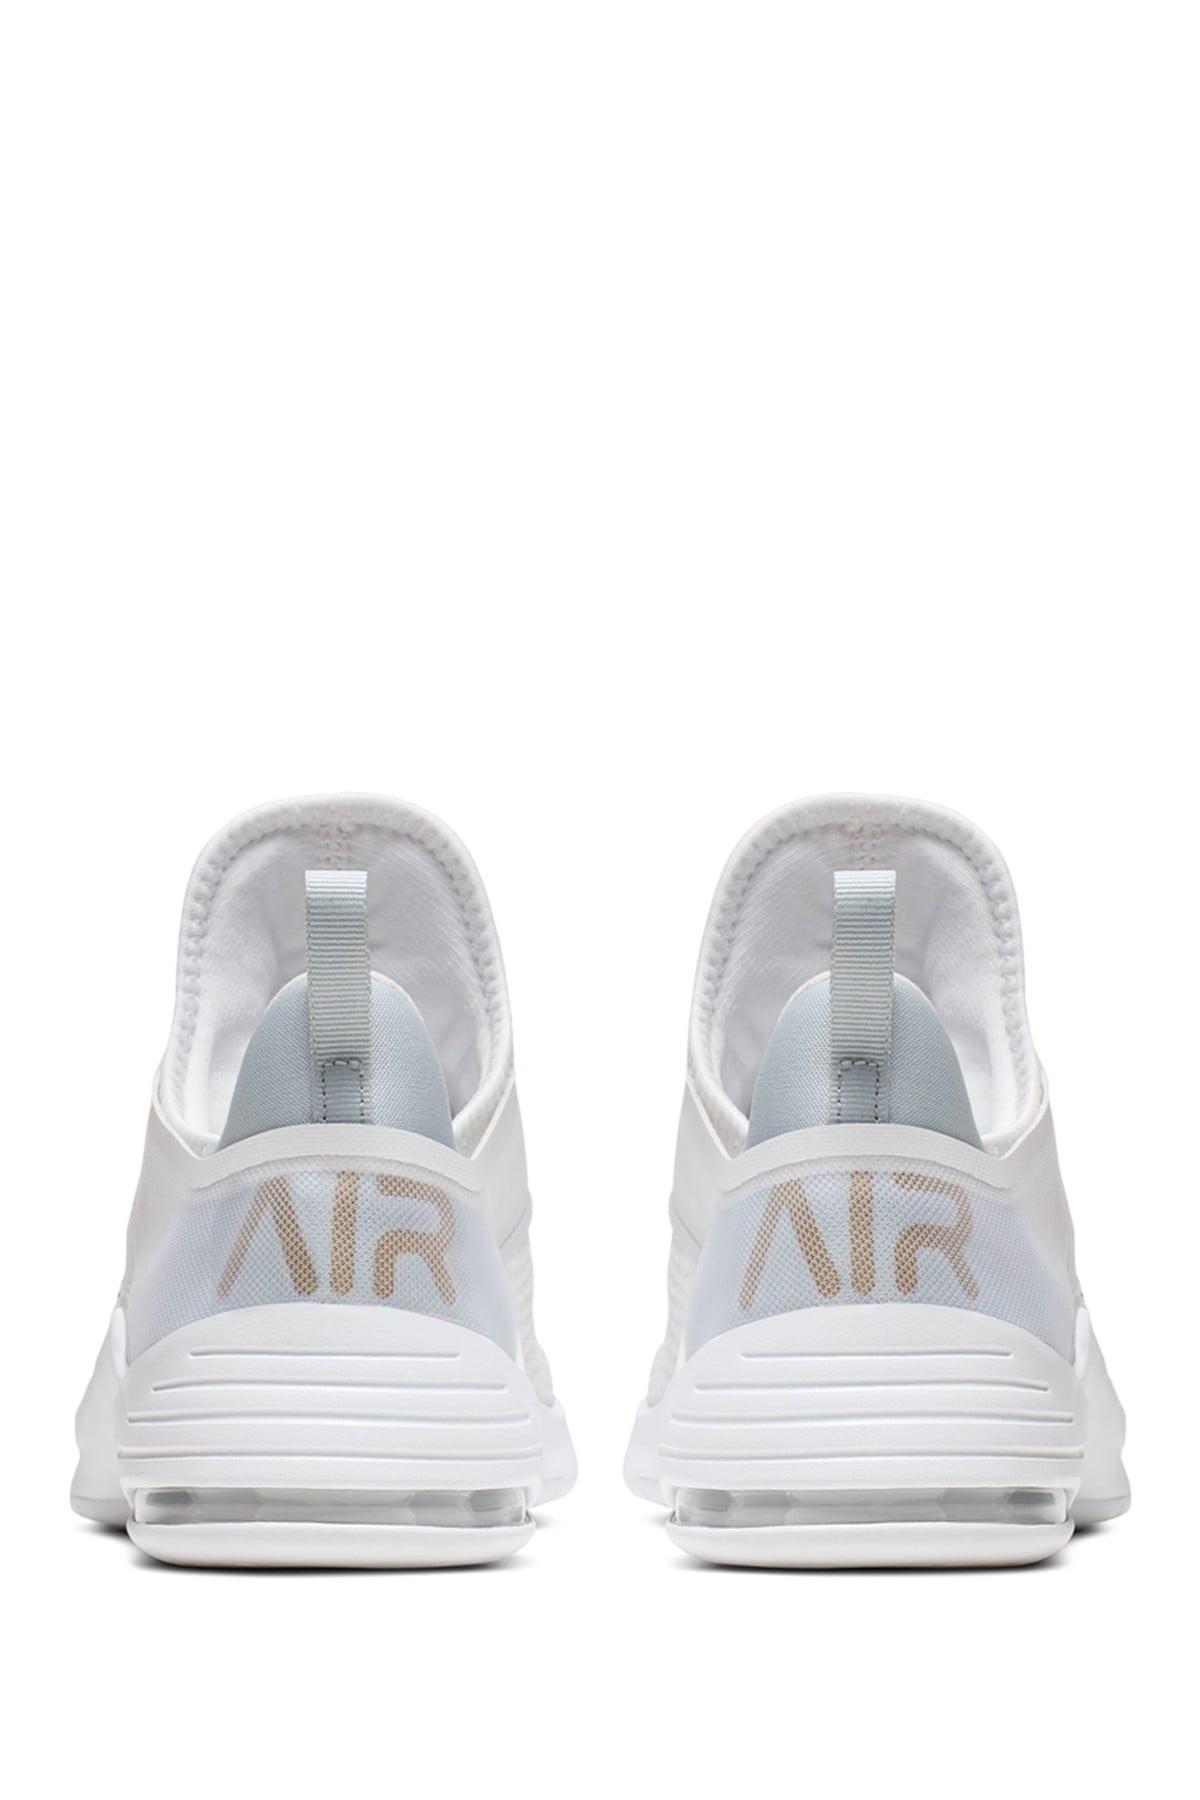 women's nike air max bella tr 2 white and gold